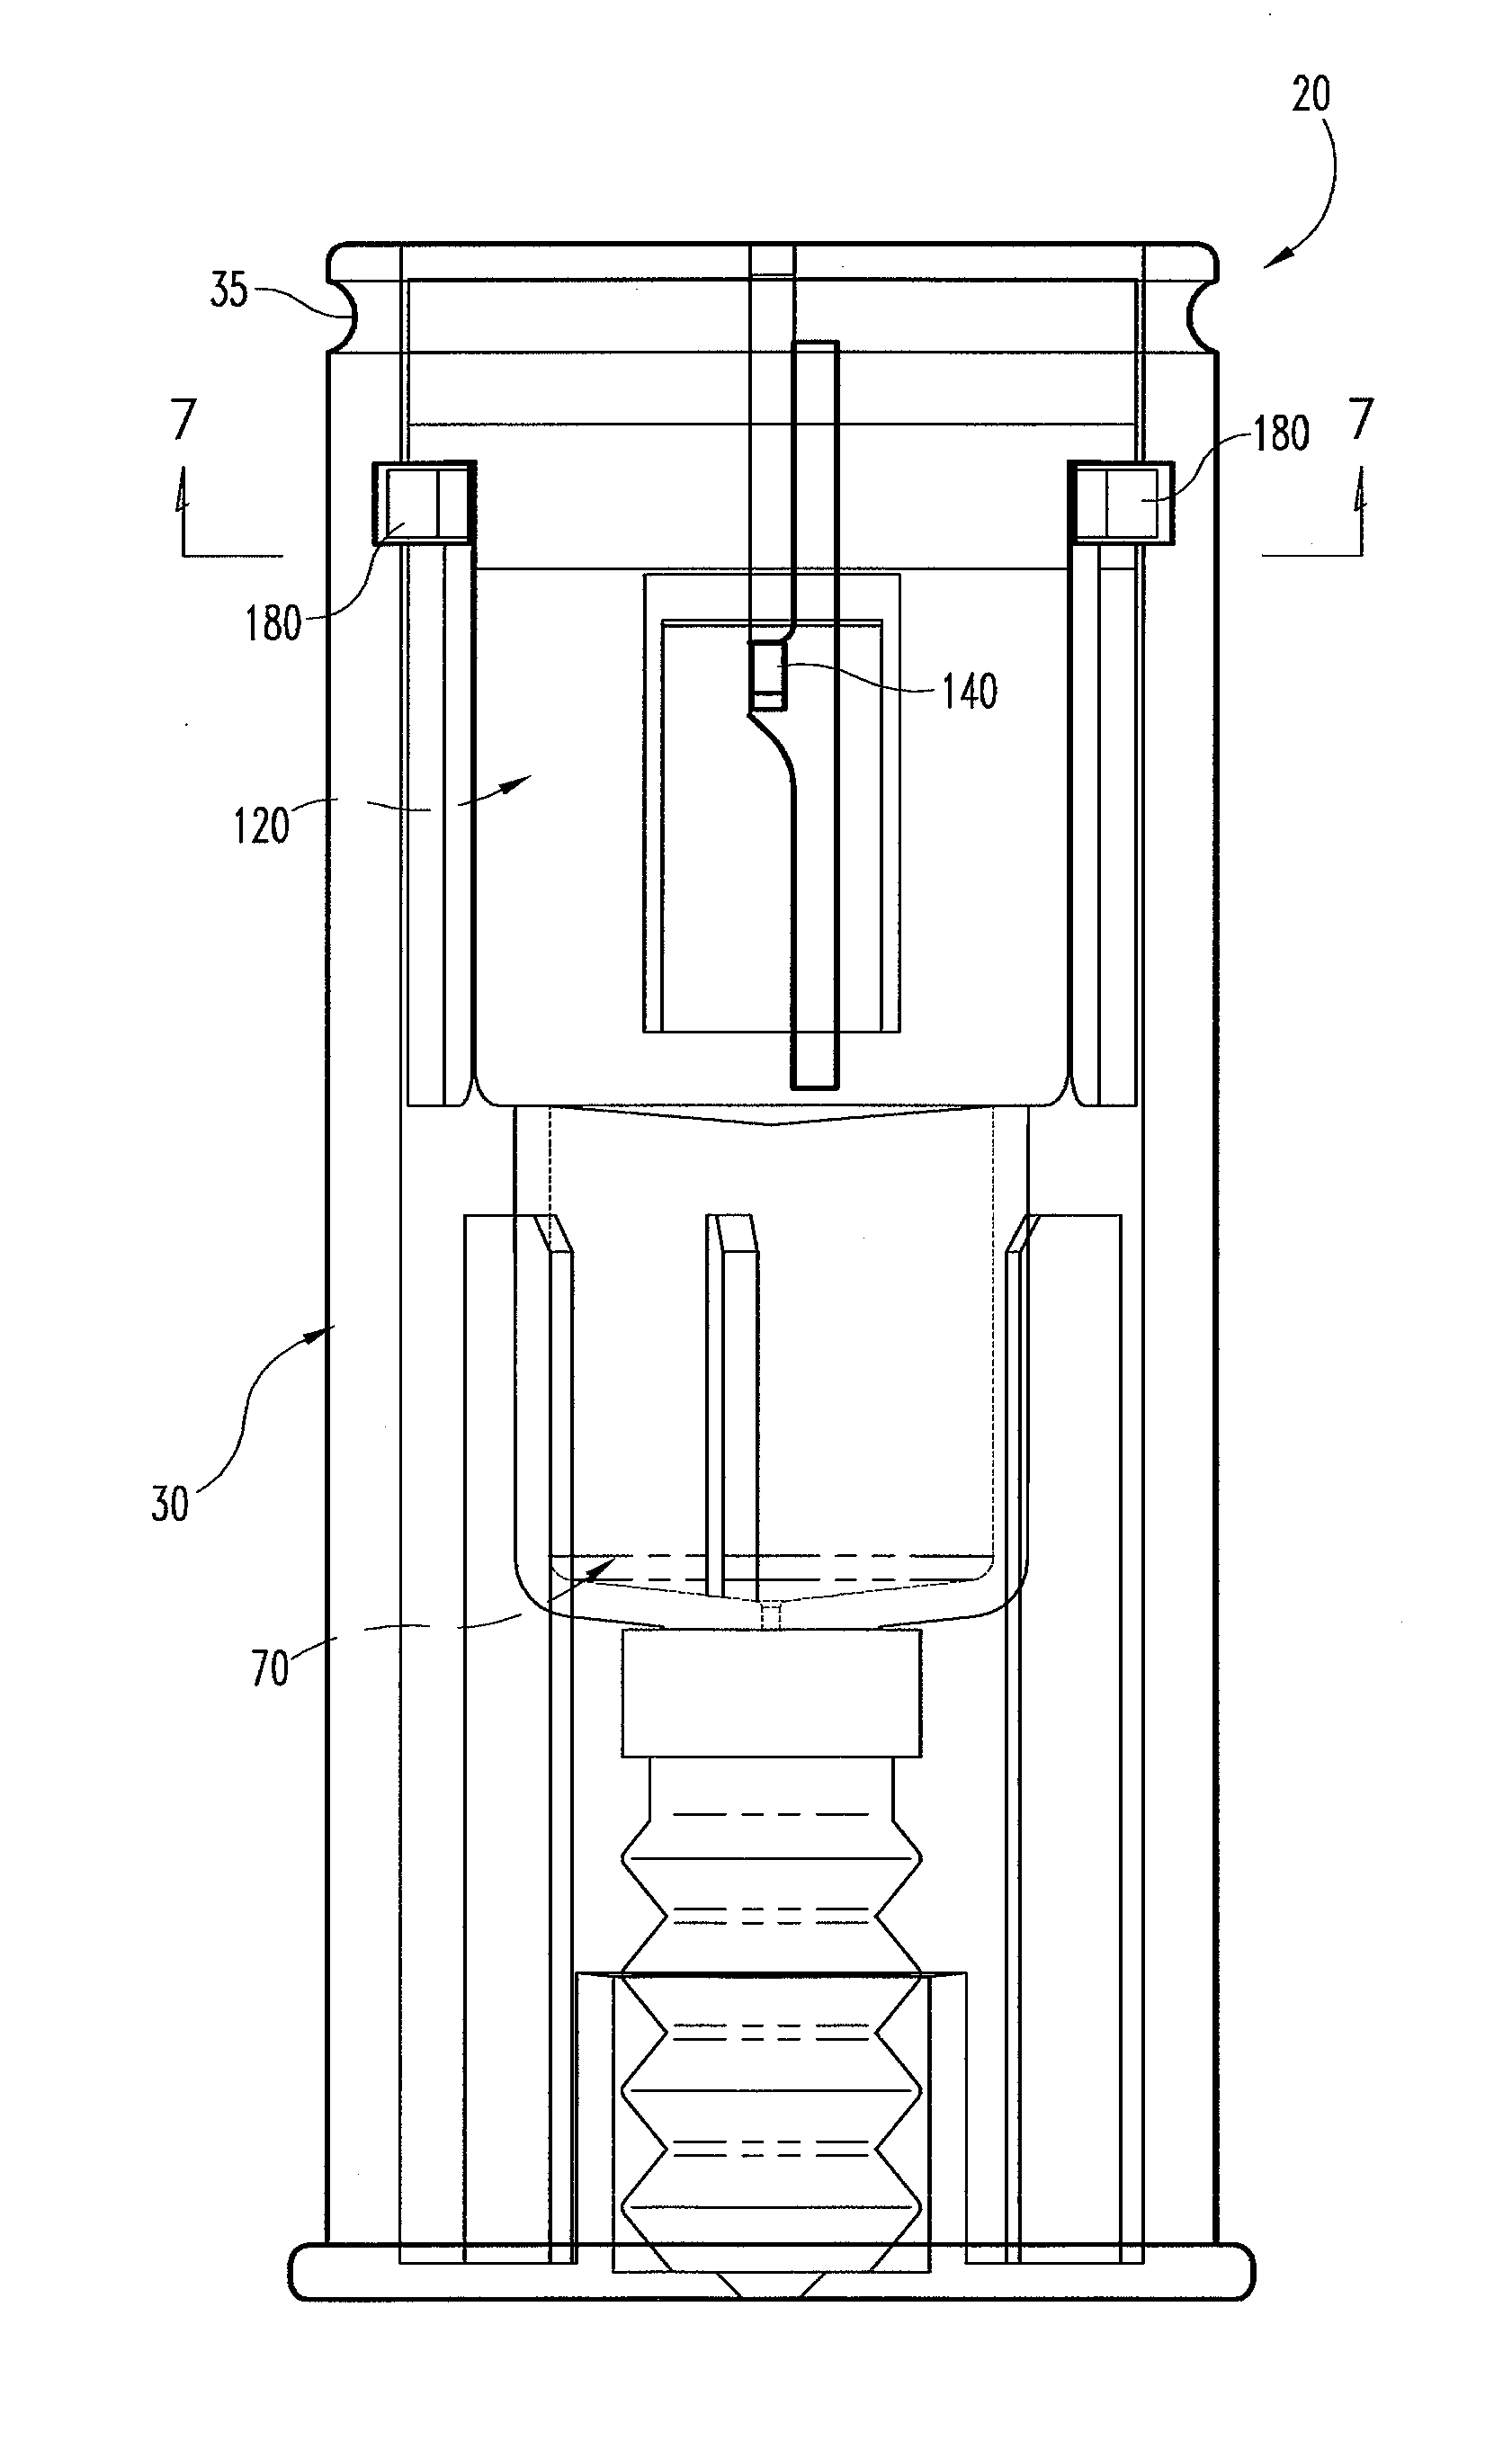 Refill module for an injection device